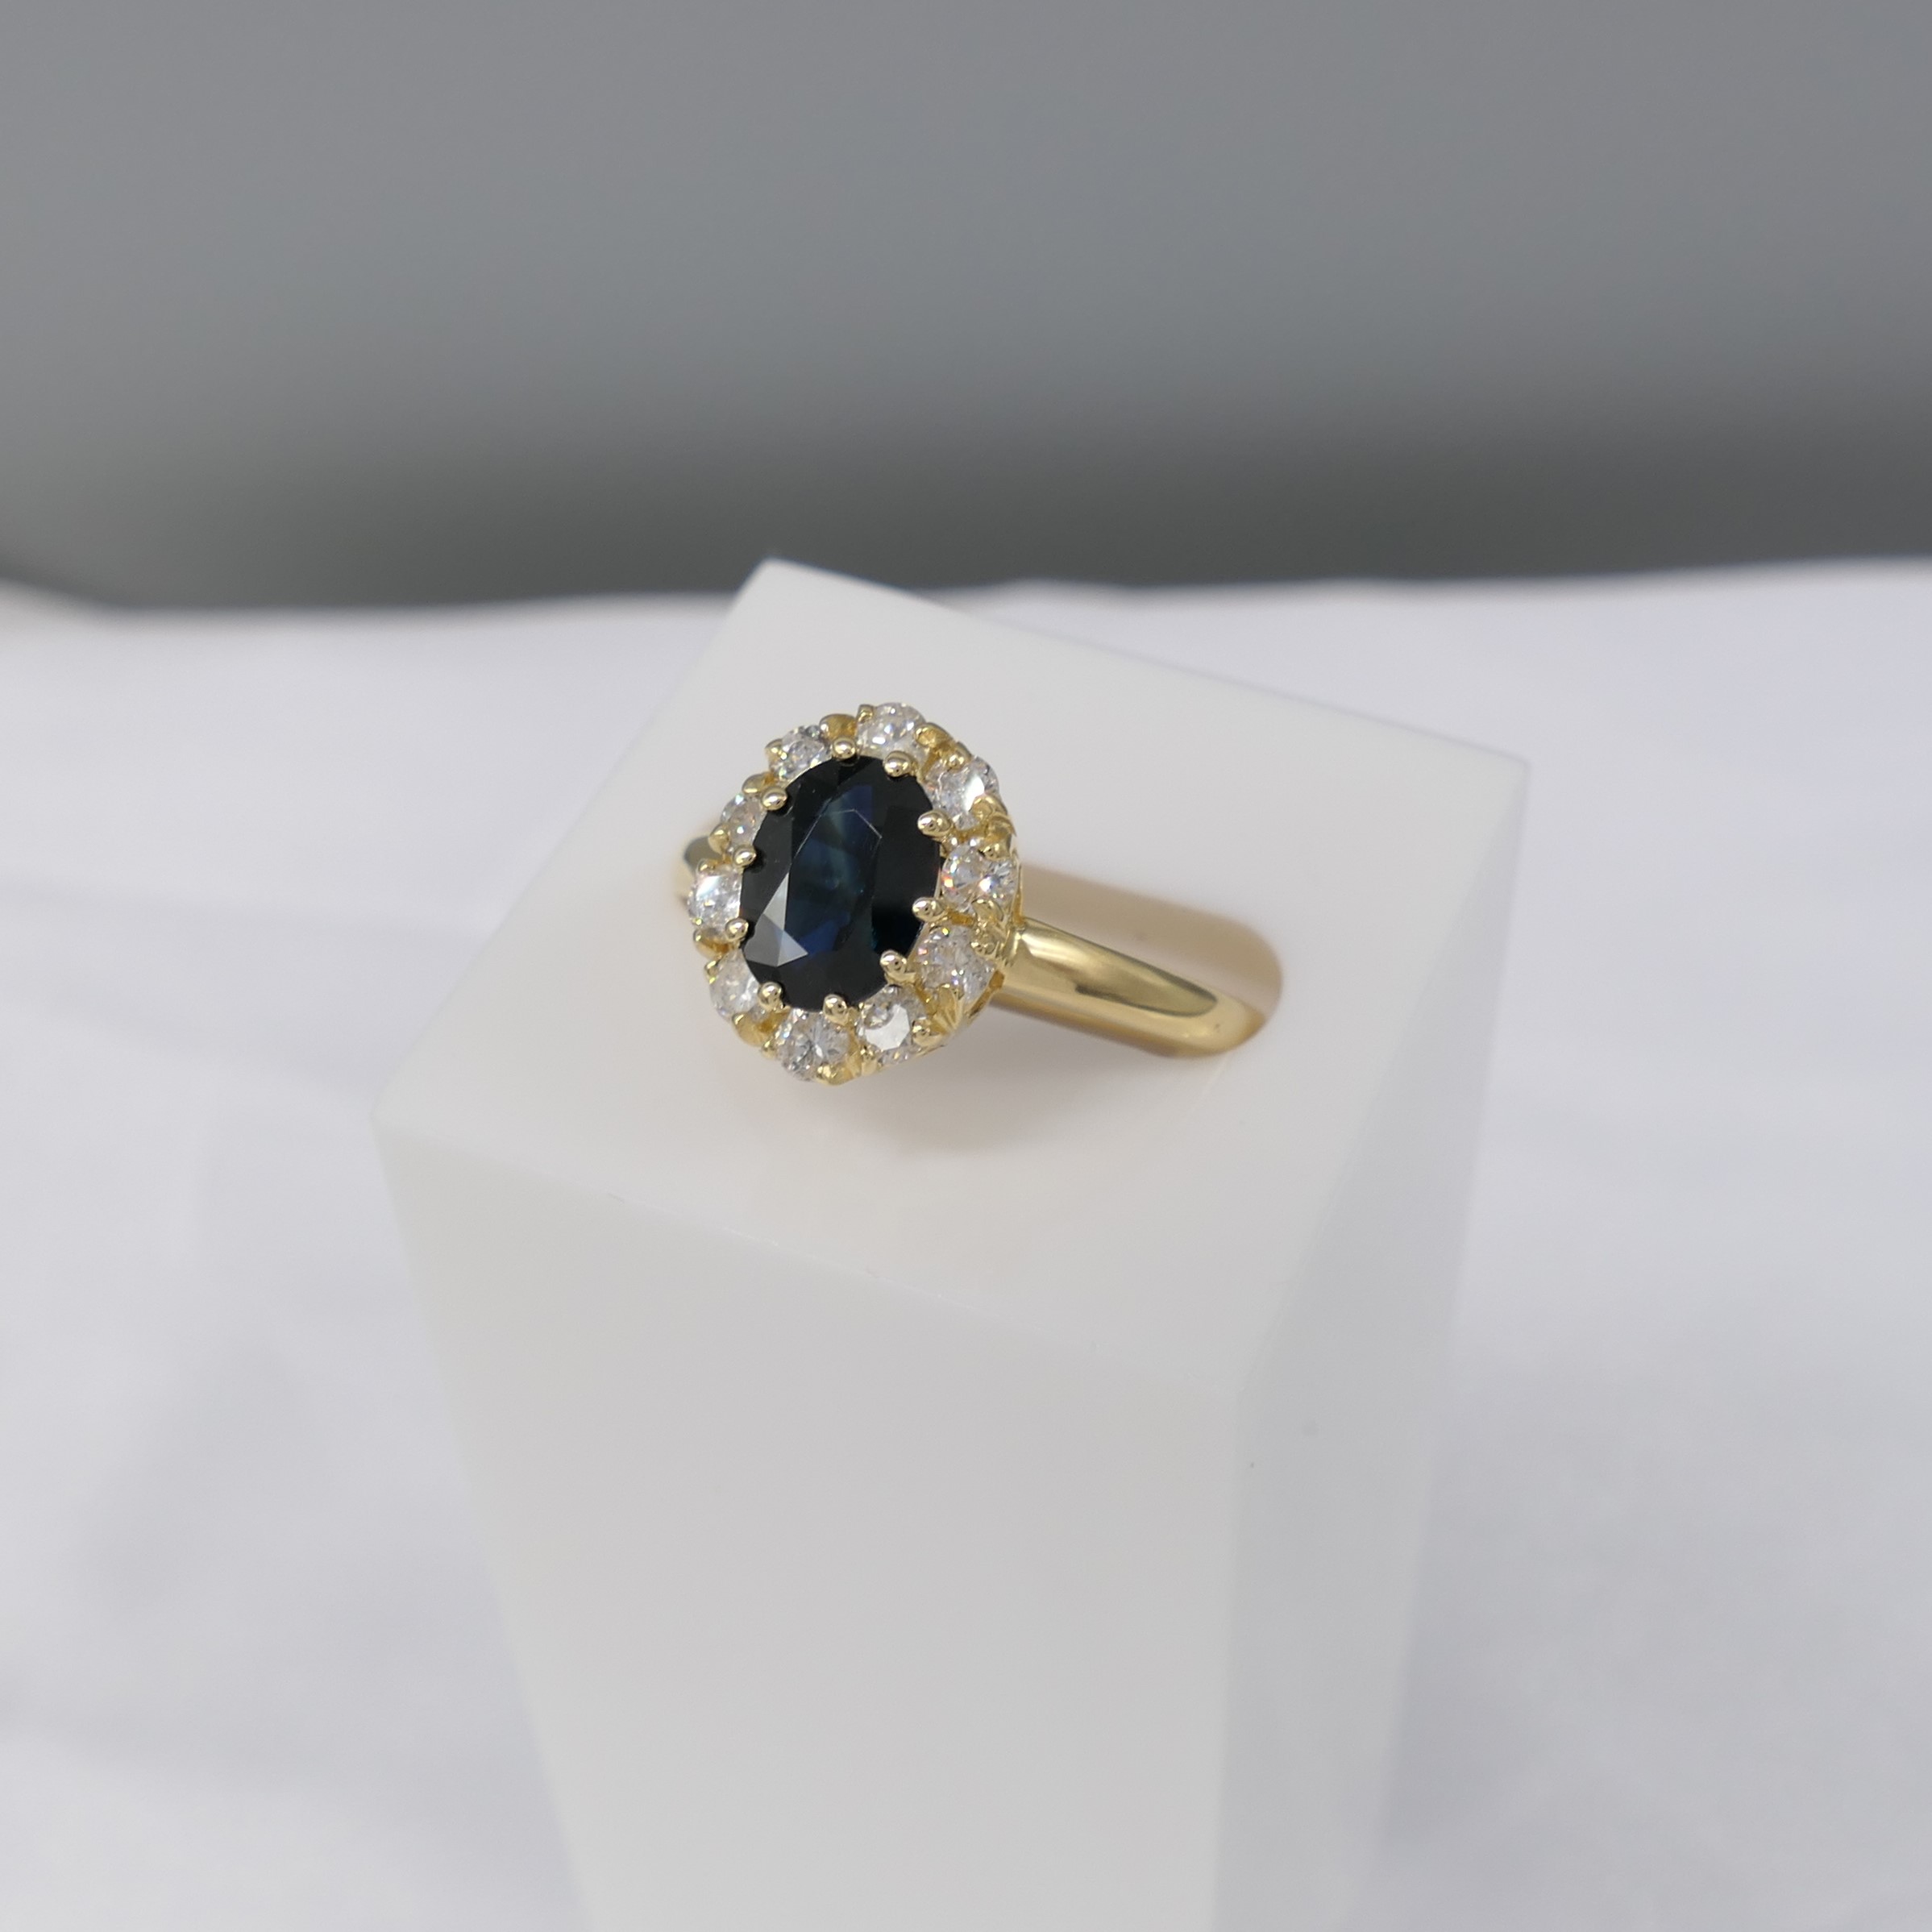 Oval-cut Sapphire and Round Brilliant-cut Diamond Cluster Ring In 18ct Yellow Gold - Image 4 of 6